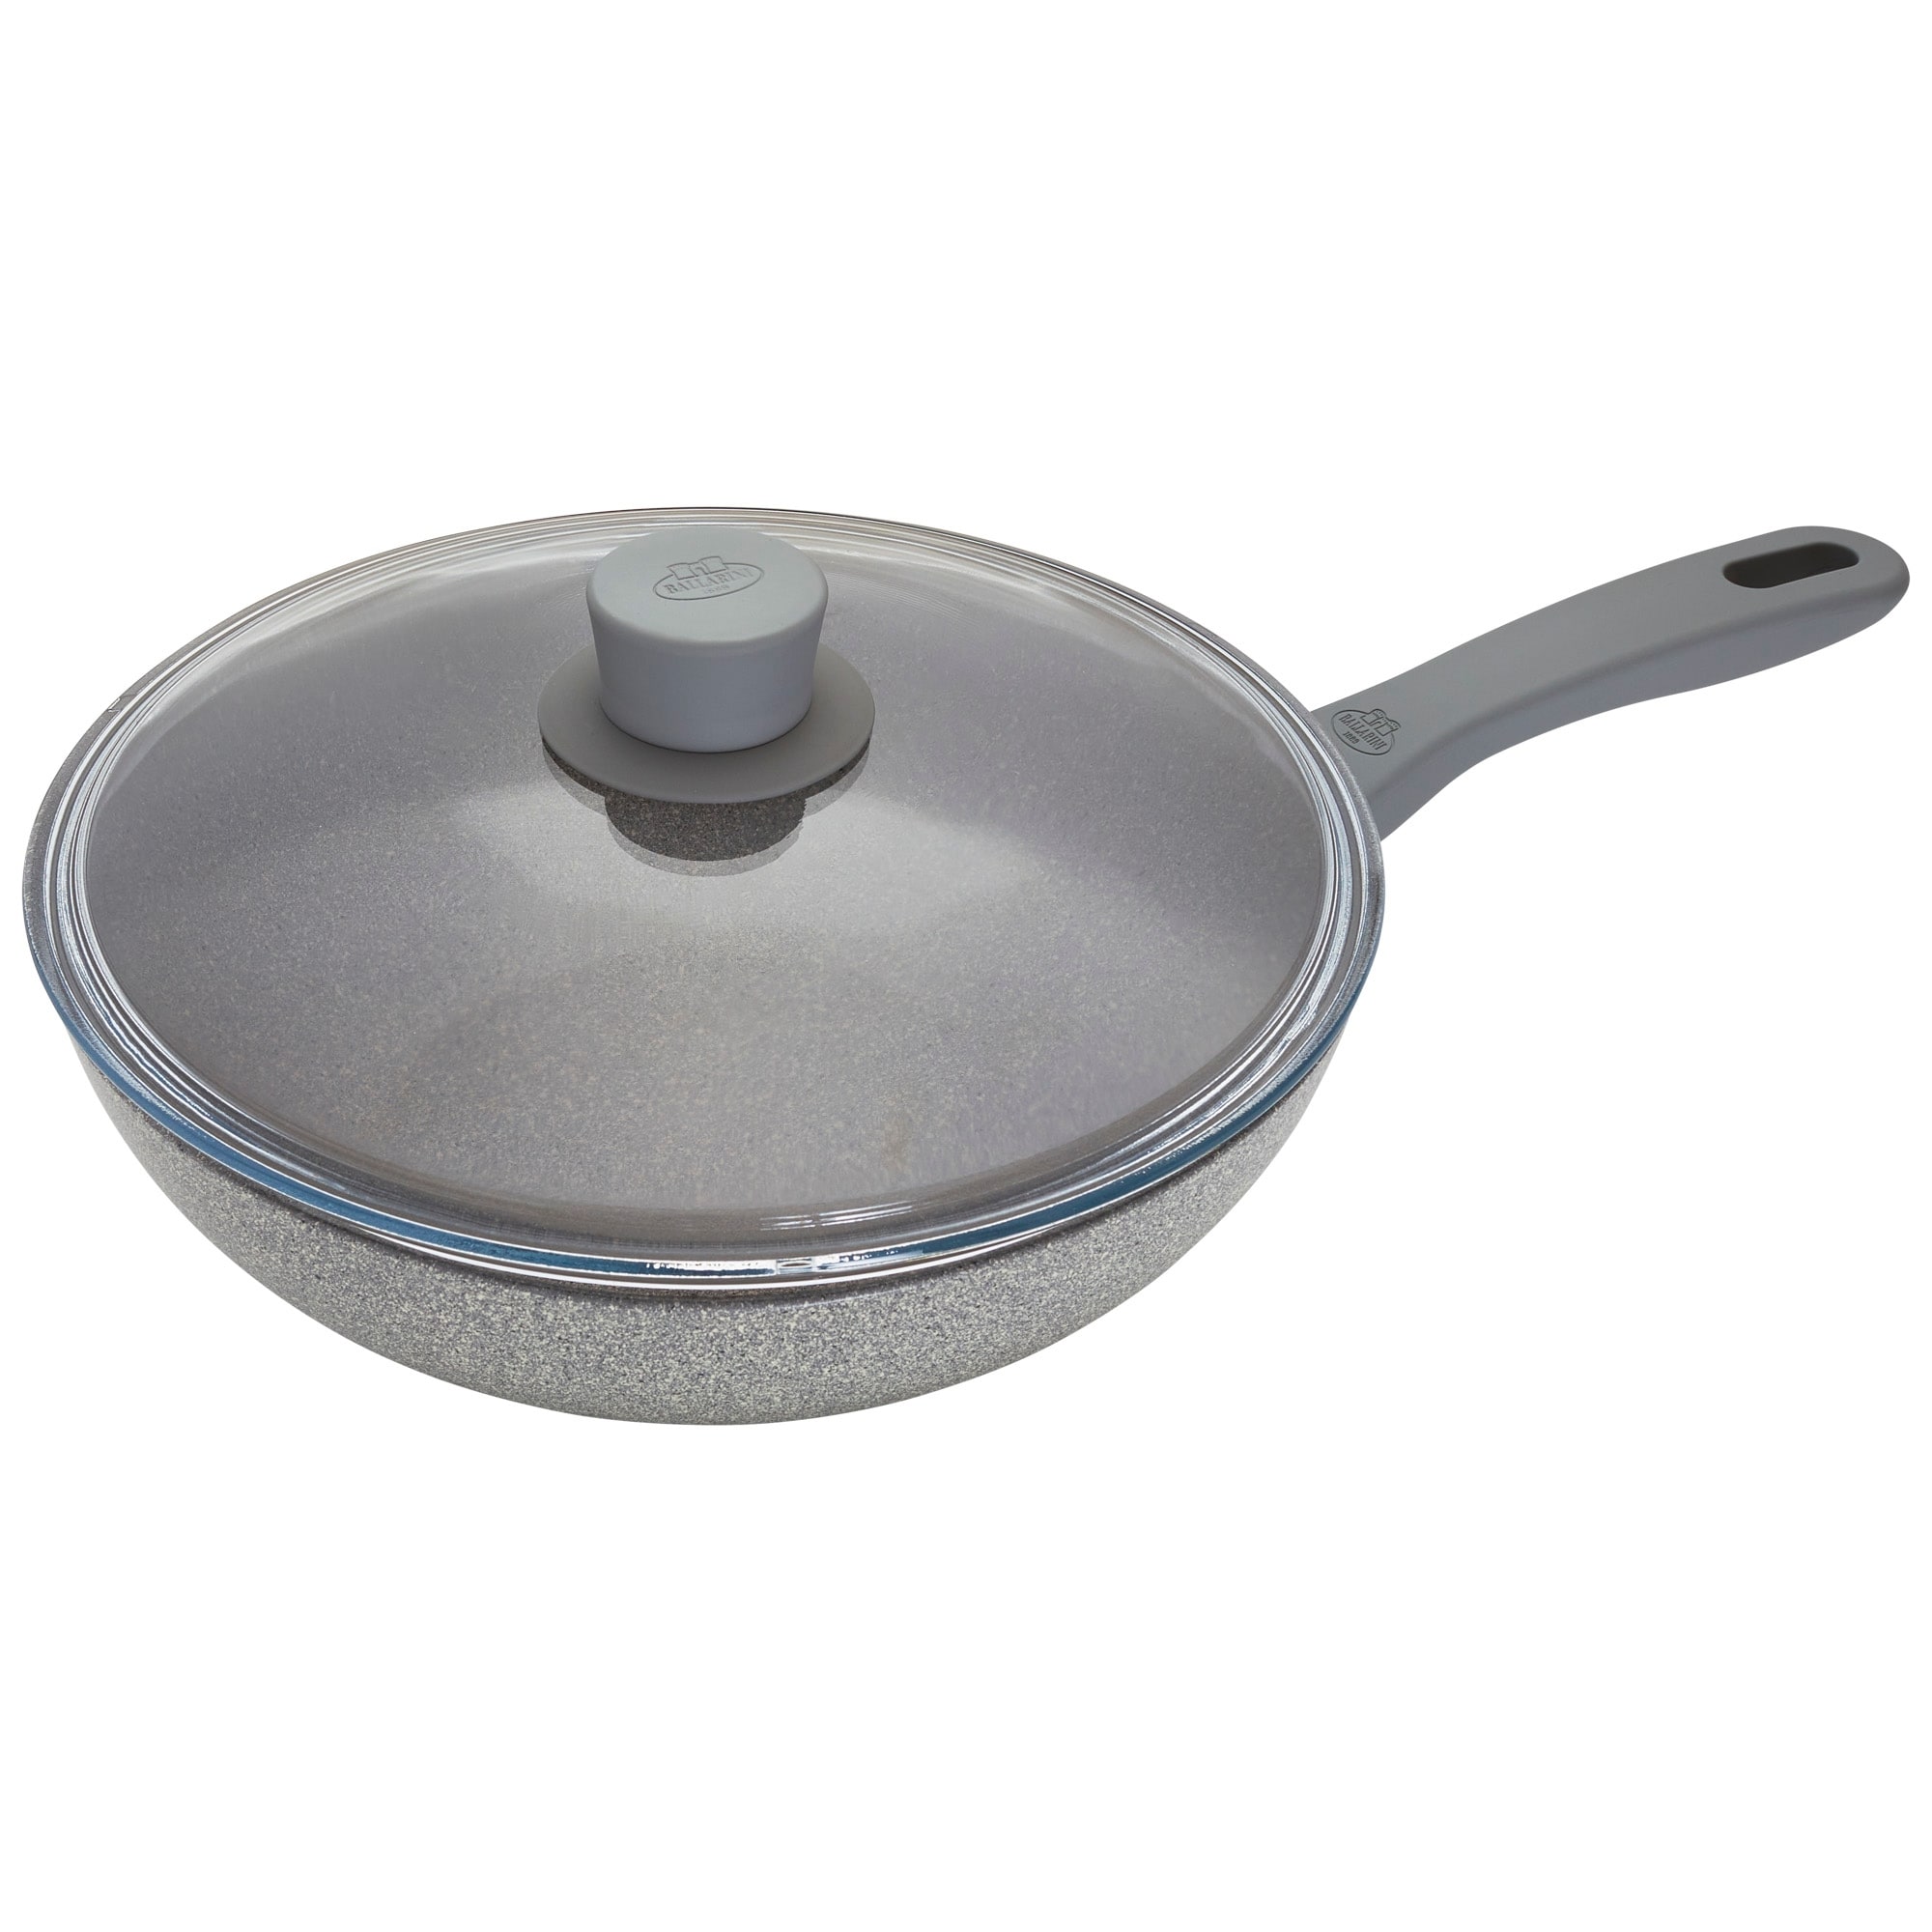 BALLARINI Parma Plus by HENCKELS 11-inch Aluminum Nonstick Stir Fry Pan  with Lid, Made in Italy - Grey - Bed Bath & Beyond - 33032544